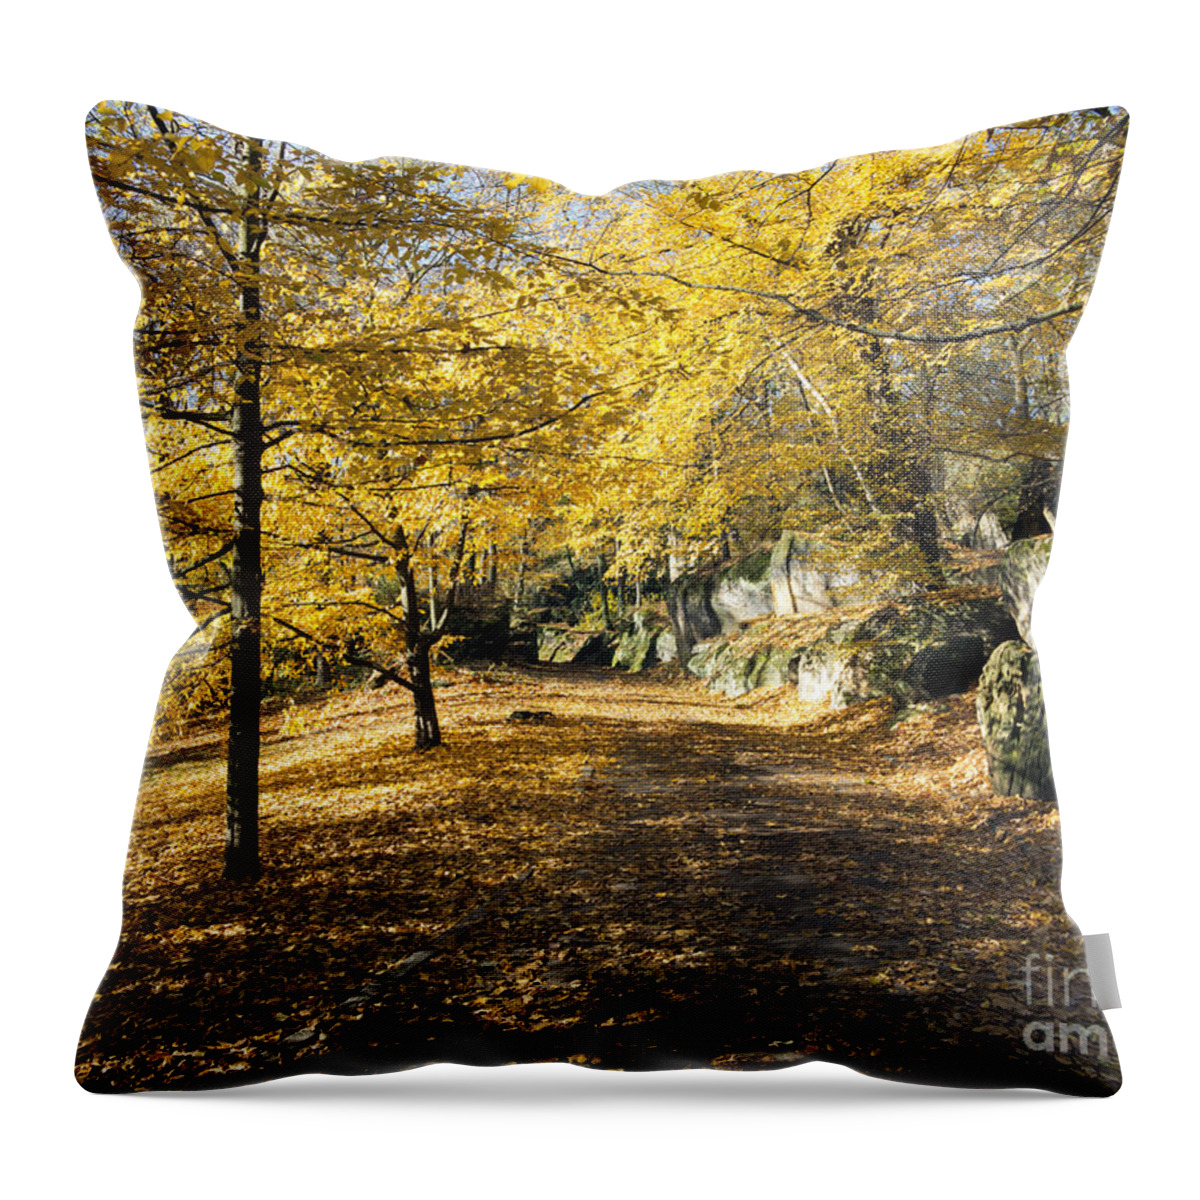 Park Throw Pillow featuring the photograph Sunny Day In The Autumn Park by Michal Boubin